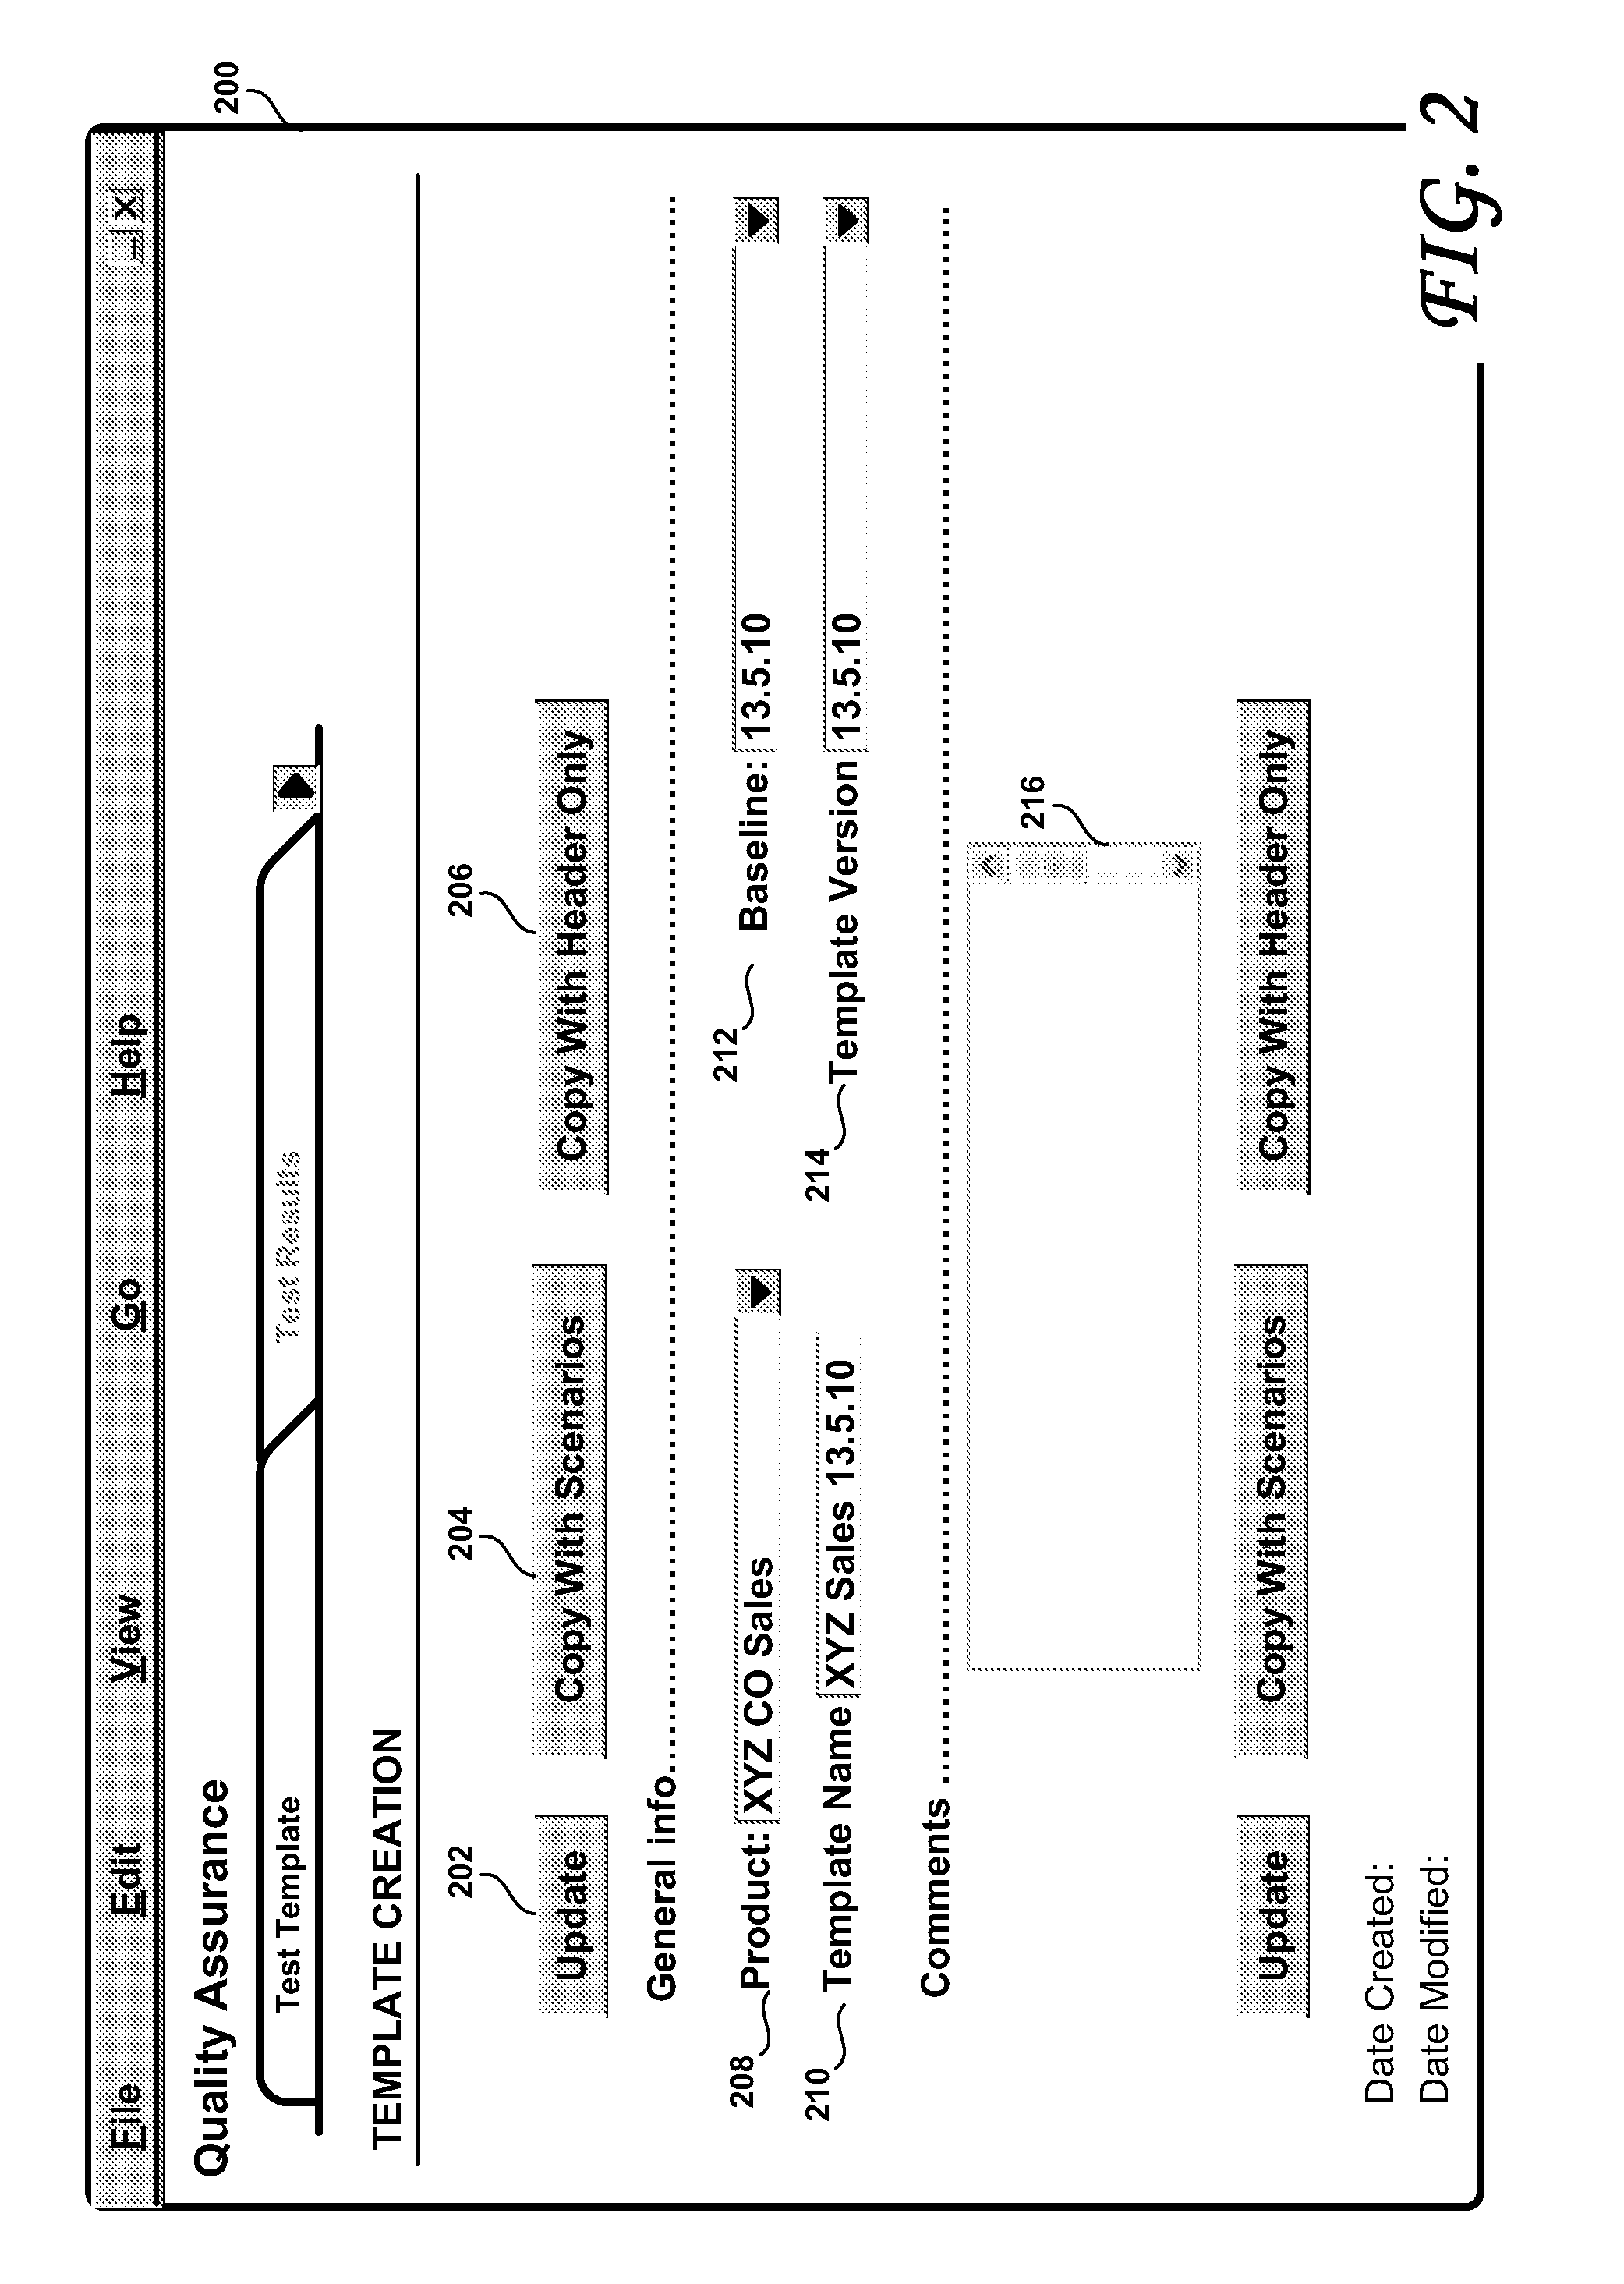 Computer-implemented methods and systems for generating software testing documentation and test results management system using same